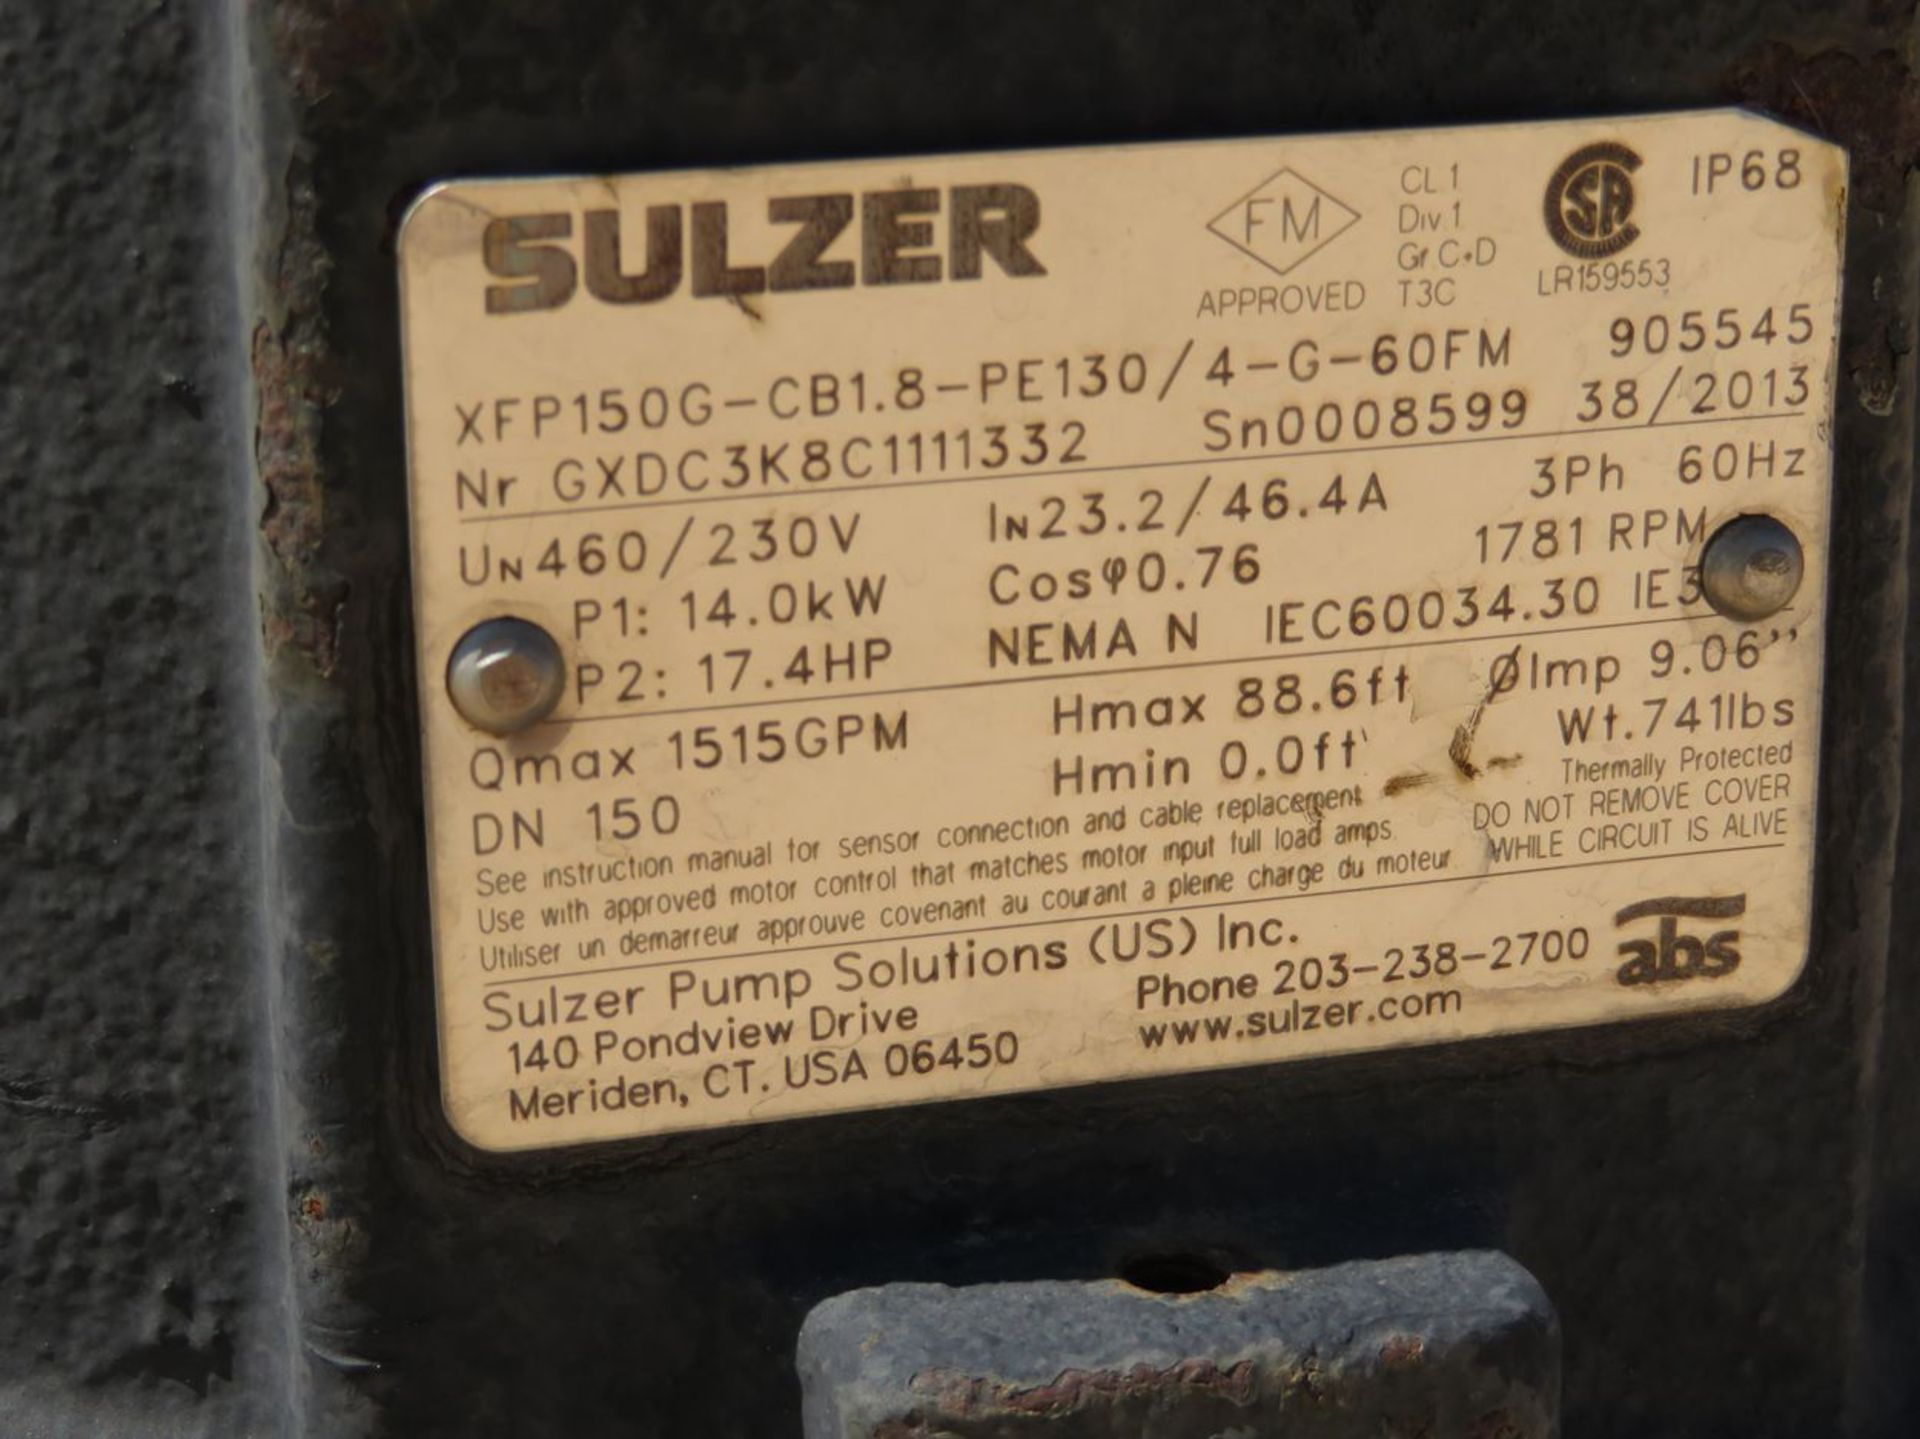 Sulzer Pump Solutions Inc. GXDC3K8C1111332 Rotary Pump, 1515 GPM, 17.4 HP, 14 Kw, 230/460V, 46.4/ - Image 3 of 3